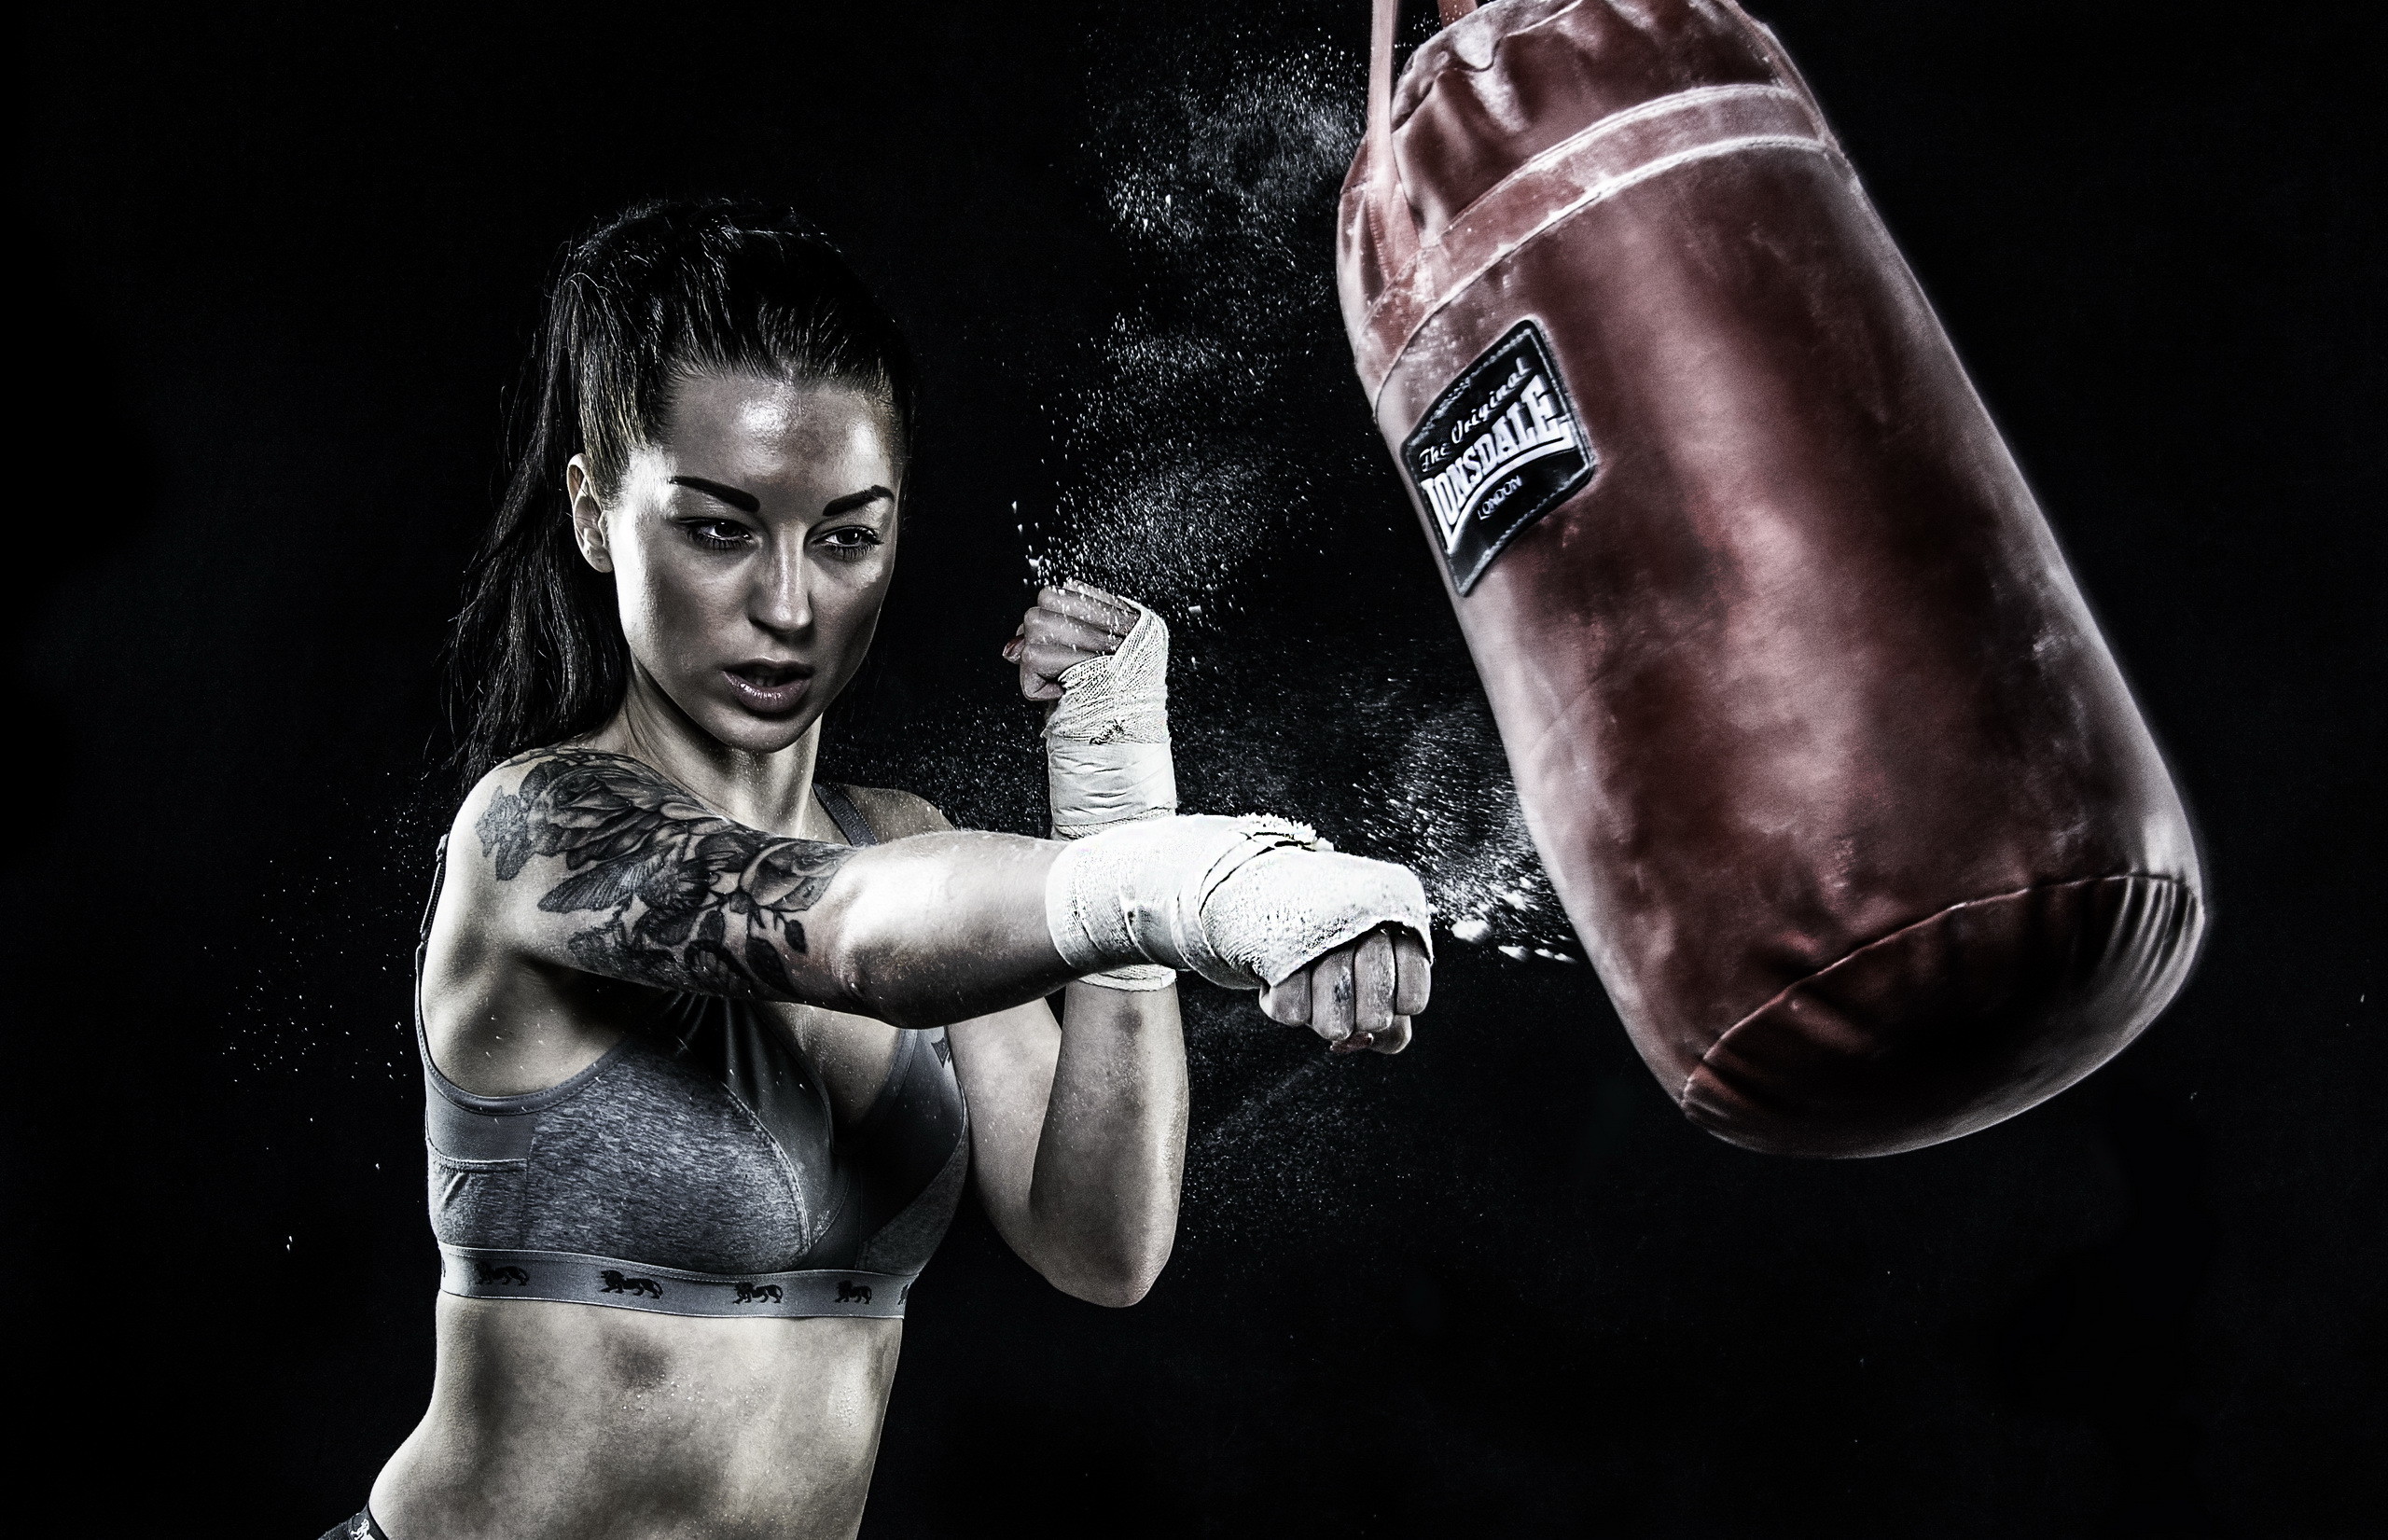 1920x1080 / 1920x1080 boxing, girl, sport - Coolwallpapers.me!